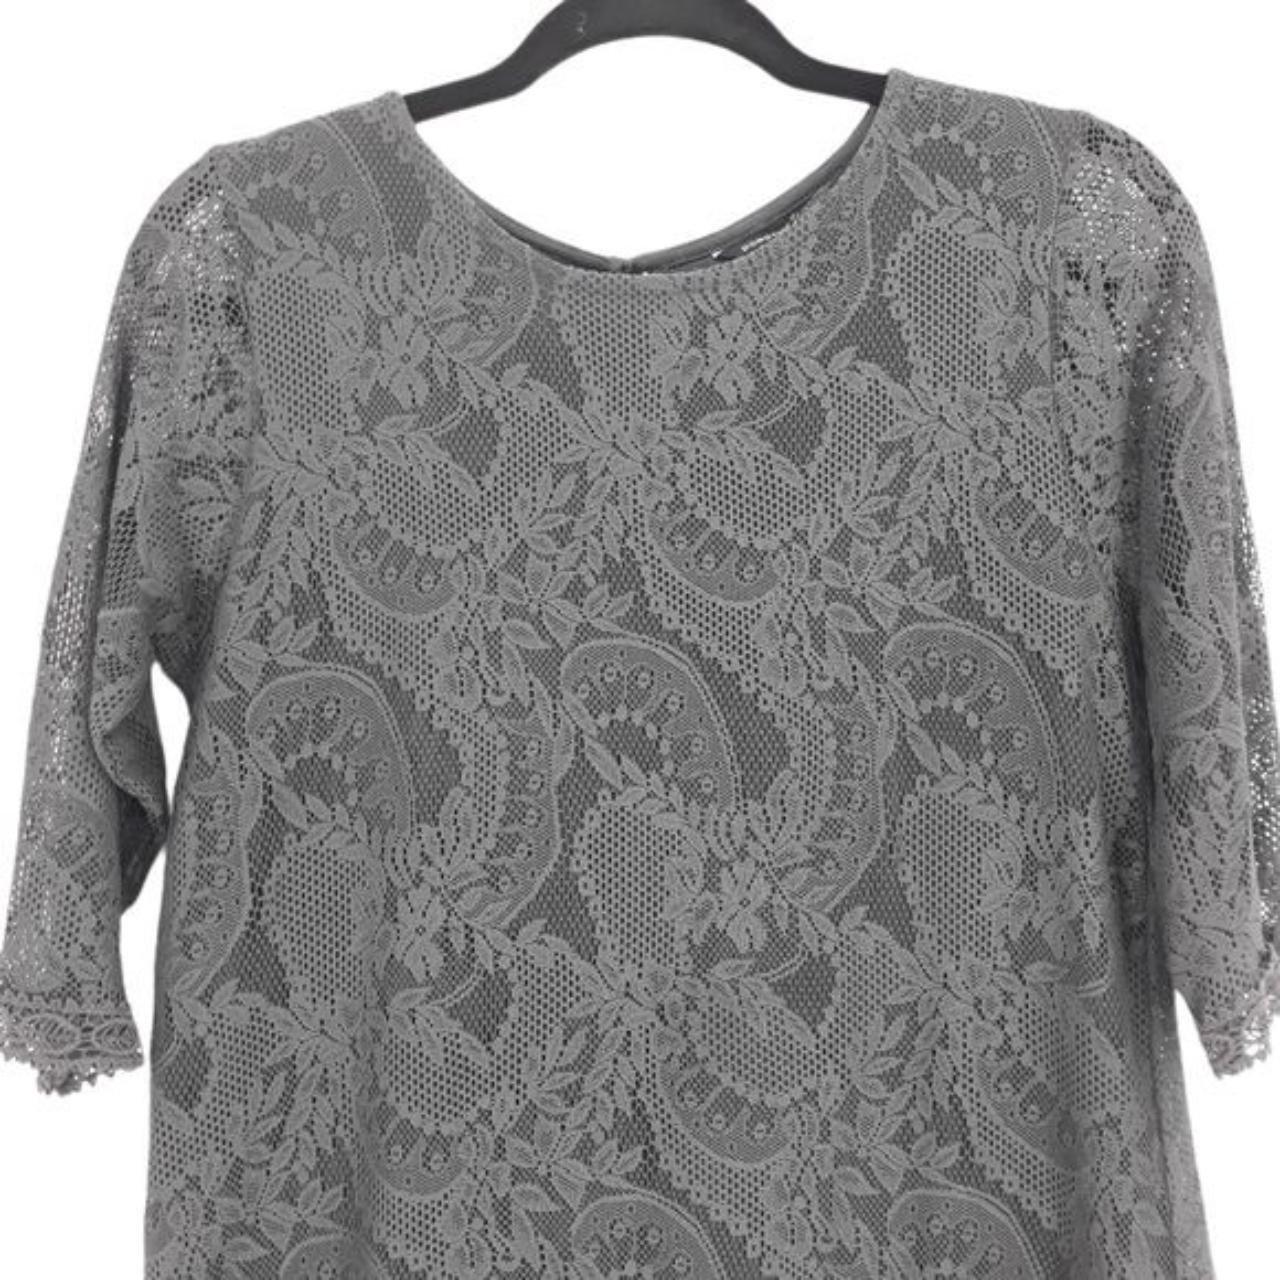 Product Image 2 - Cotton charcoal gray paisley lace